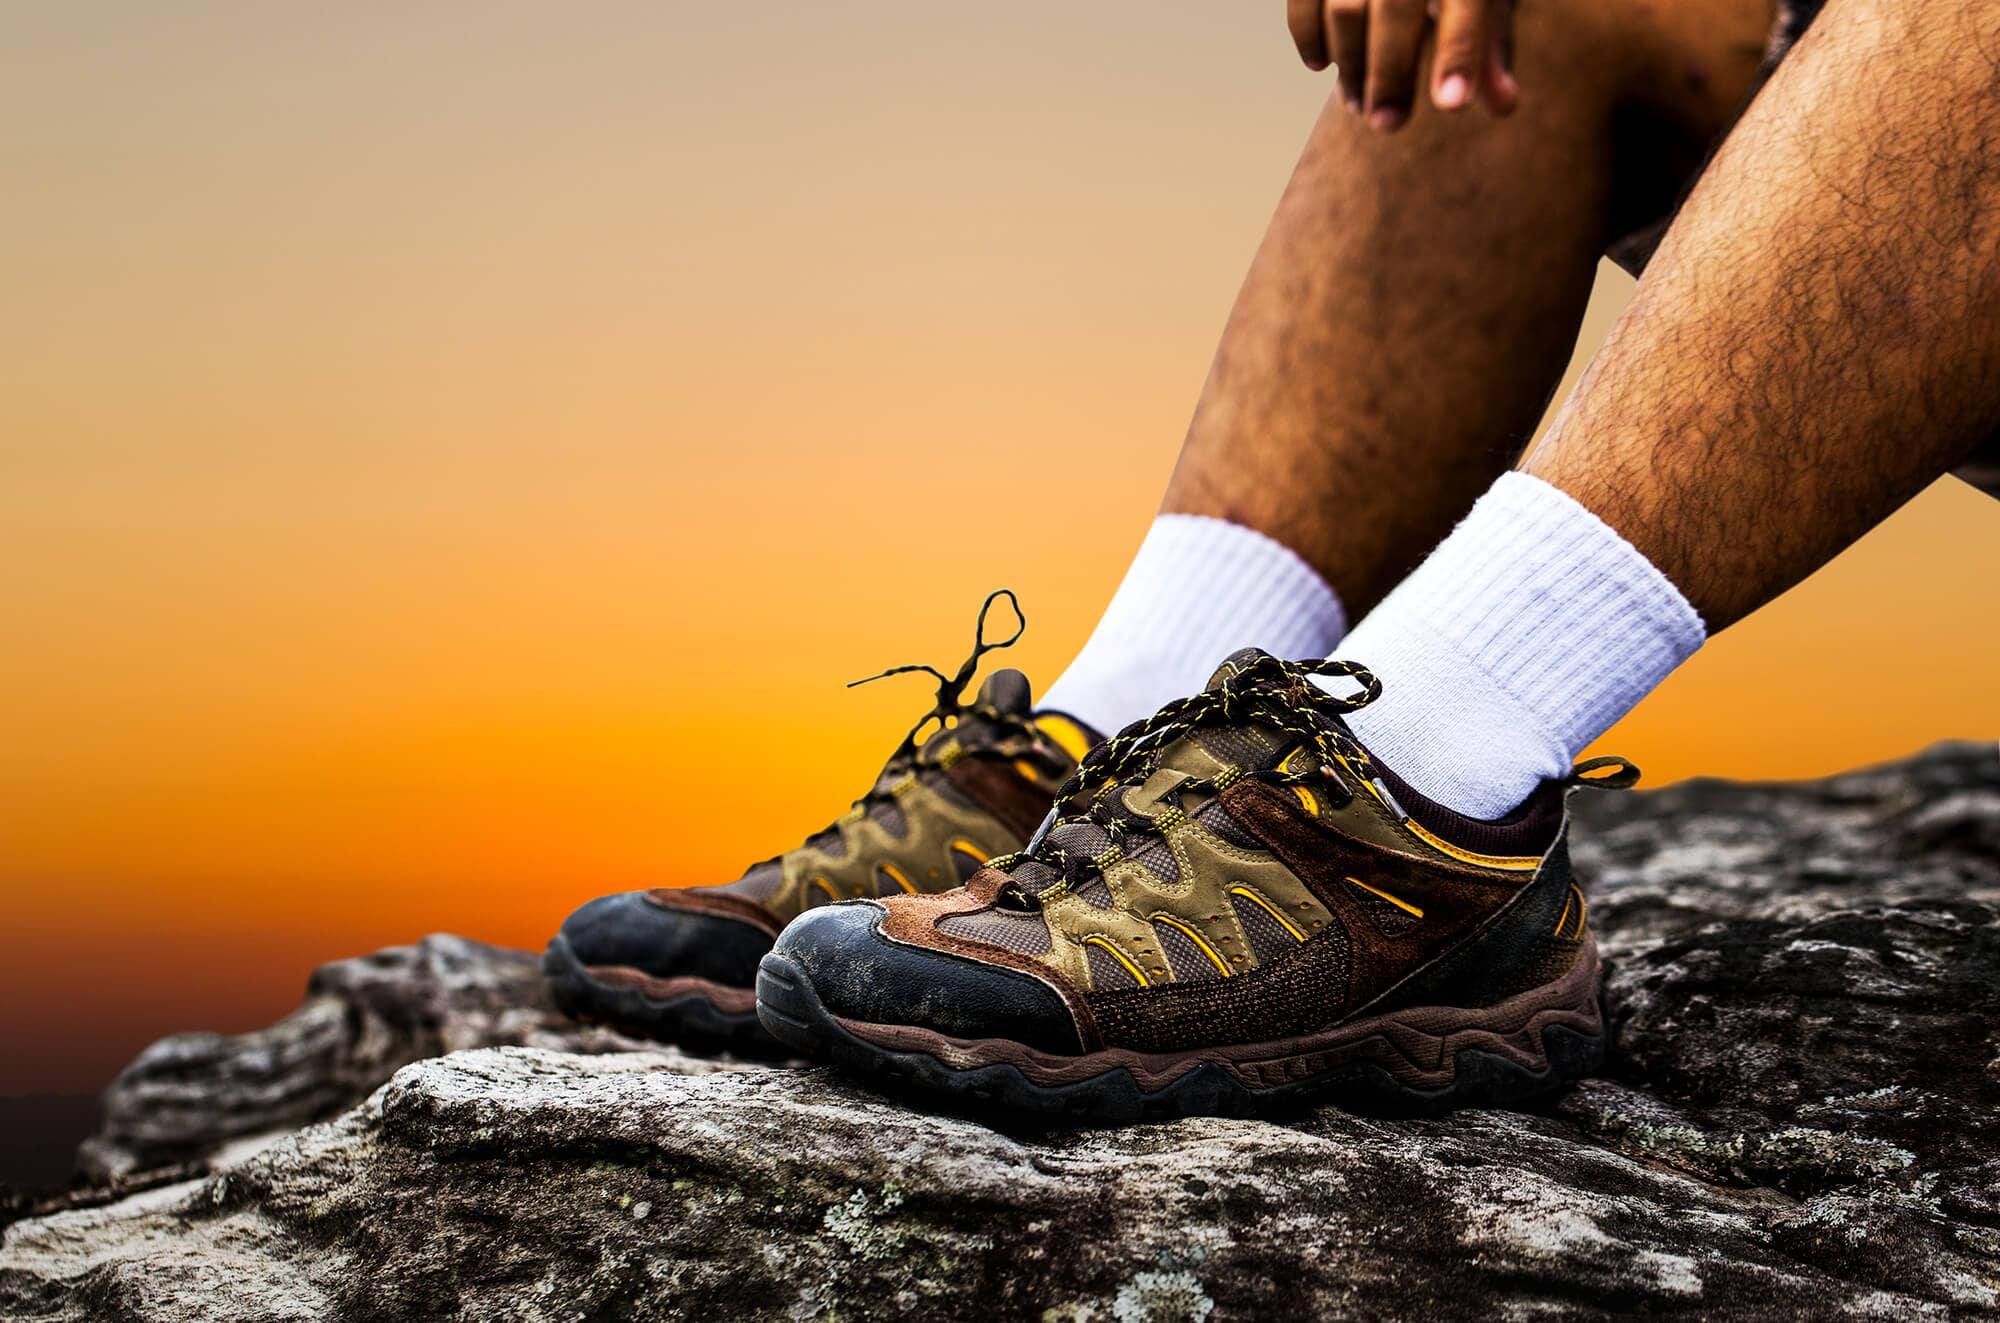 Do Hiking Sock Liners Prevent Blisters When Hiking Or Backpacking?